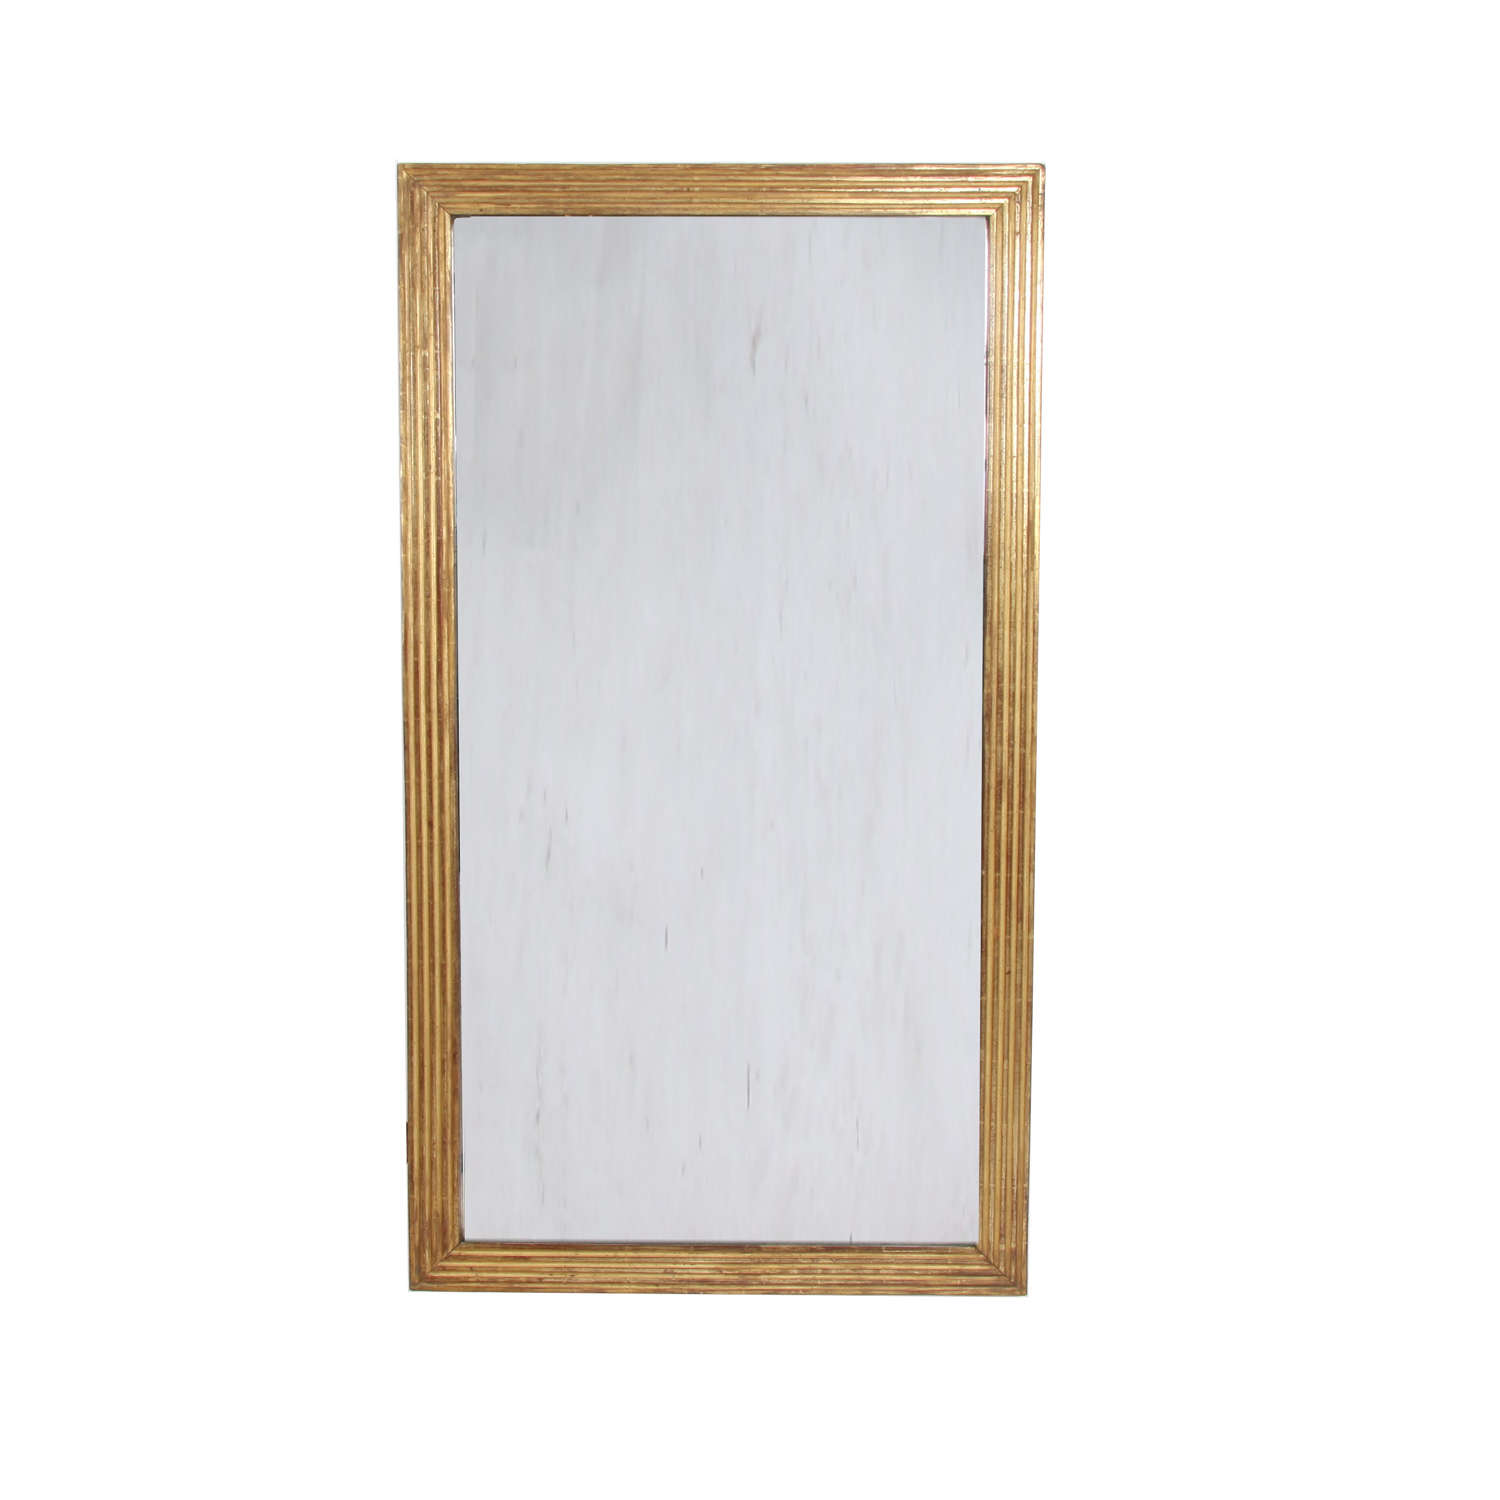 French Giltwood Mirror with Reeded Frame